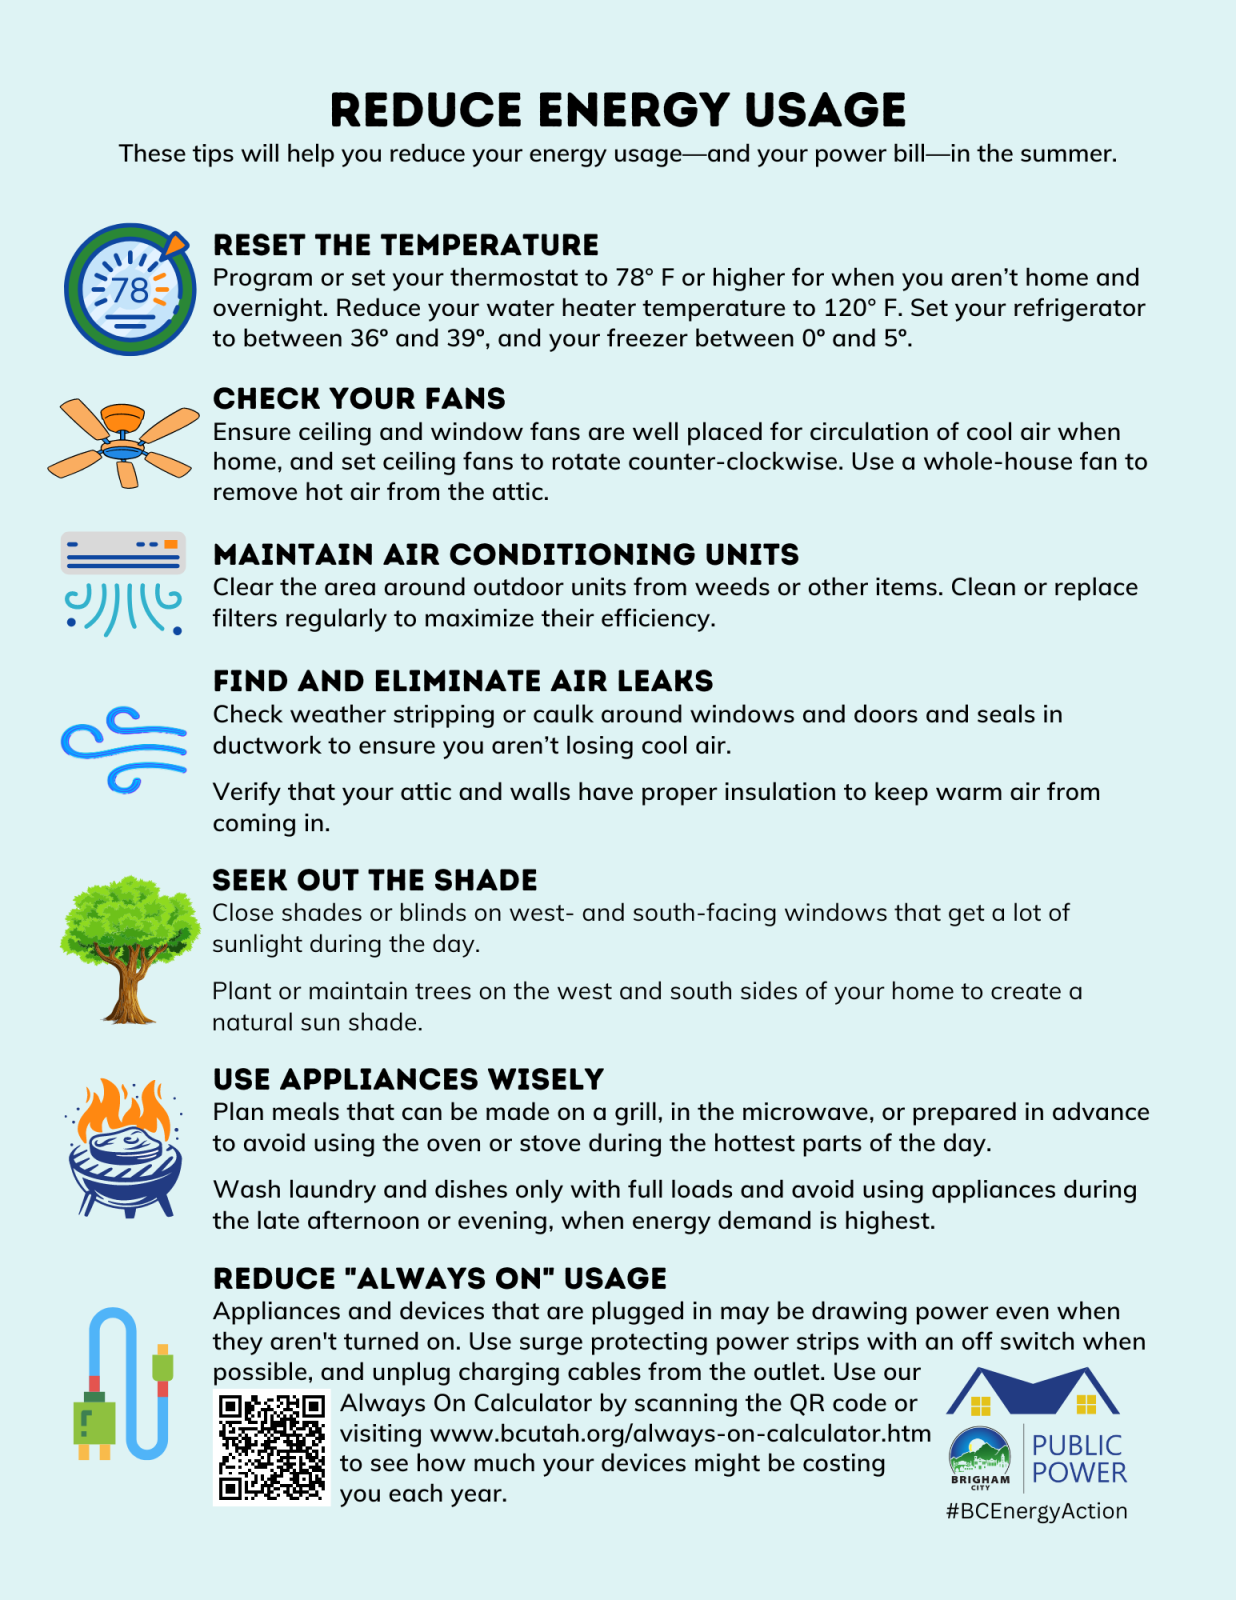 a list of tips for reducing energy usage in summer